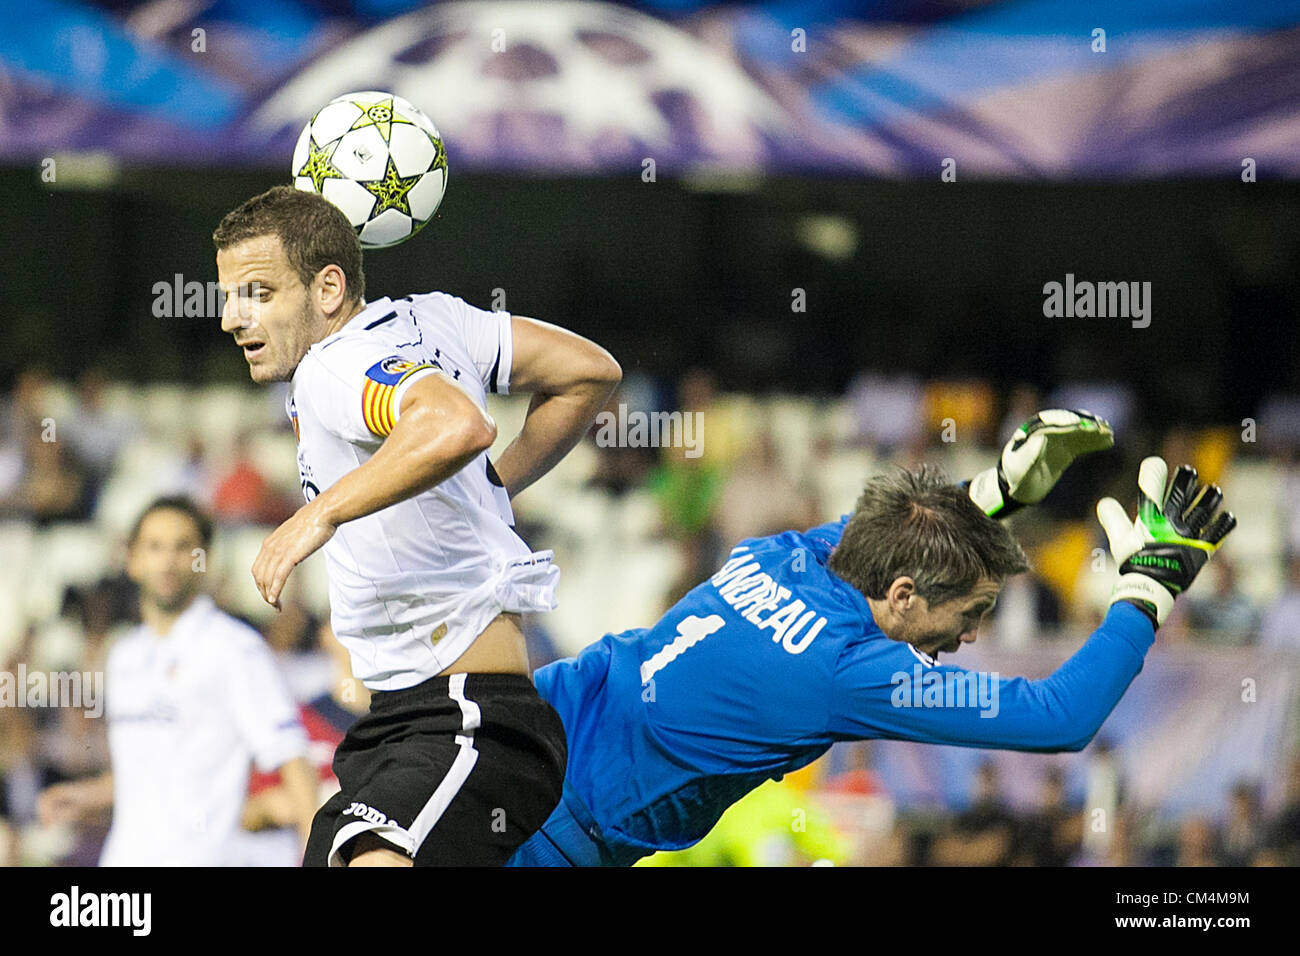 02.10.2012 Valencia, Spain. Goal keeper Mickael Landreau of LOSC Lille is fouled by Forward Roberto Soldado of Valencia CF on a high ball action during the Champions League Group G game between Valencia  and Lille from Mestalla, Valencia, Spain. Stock Photo